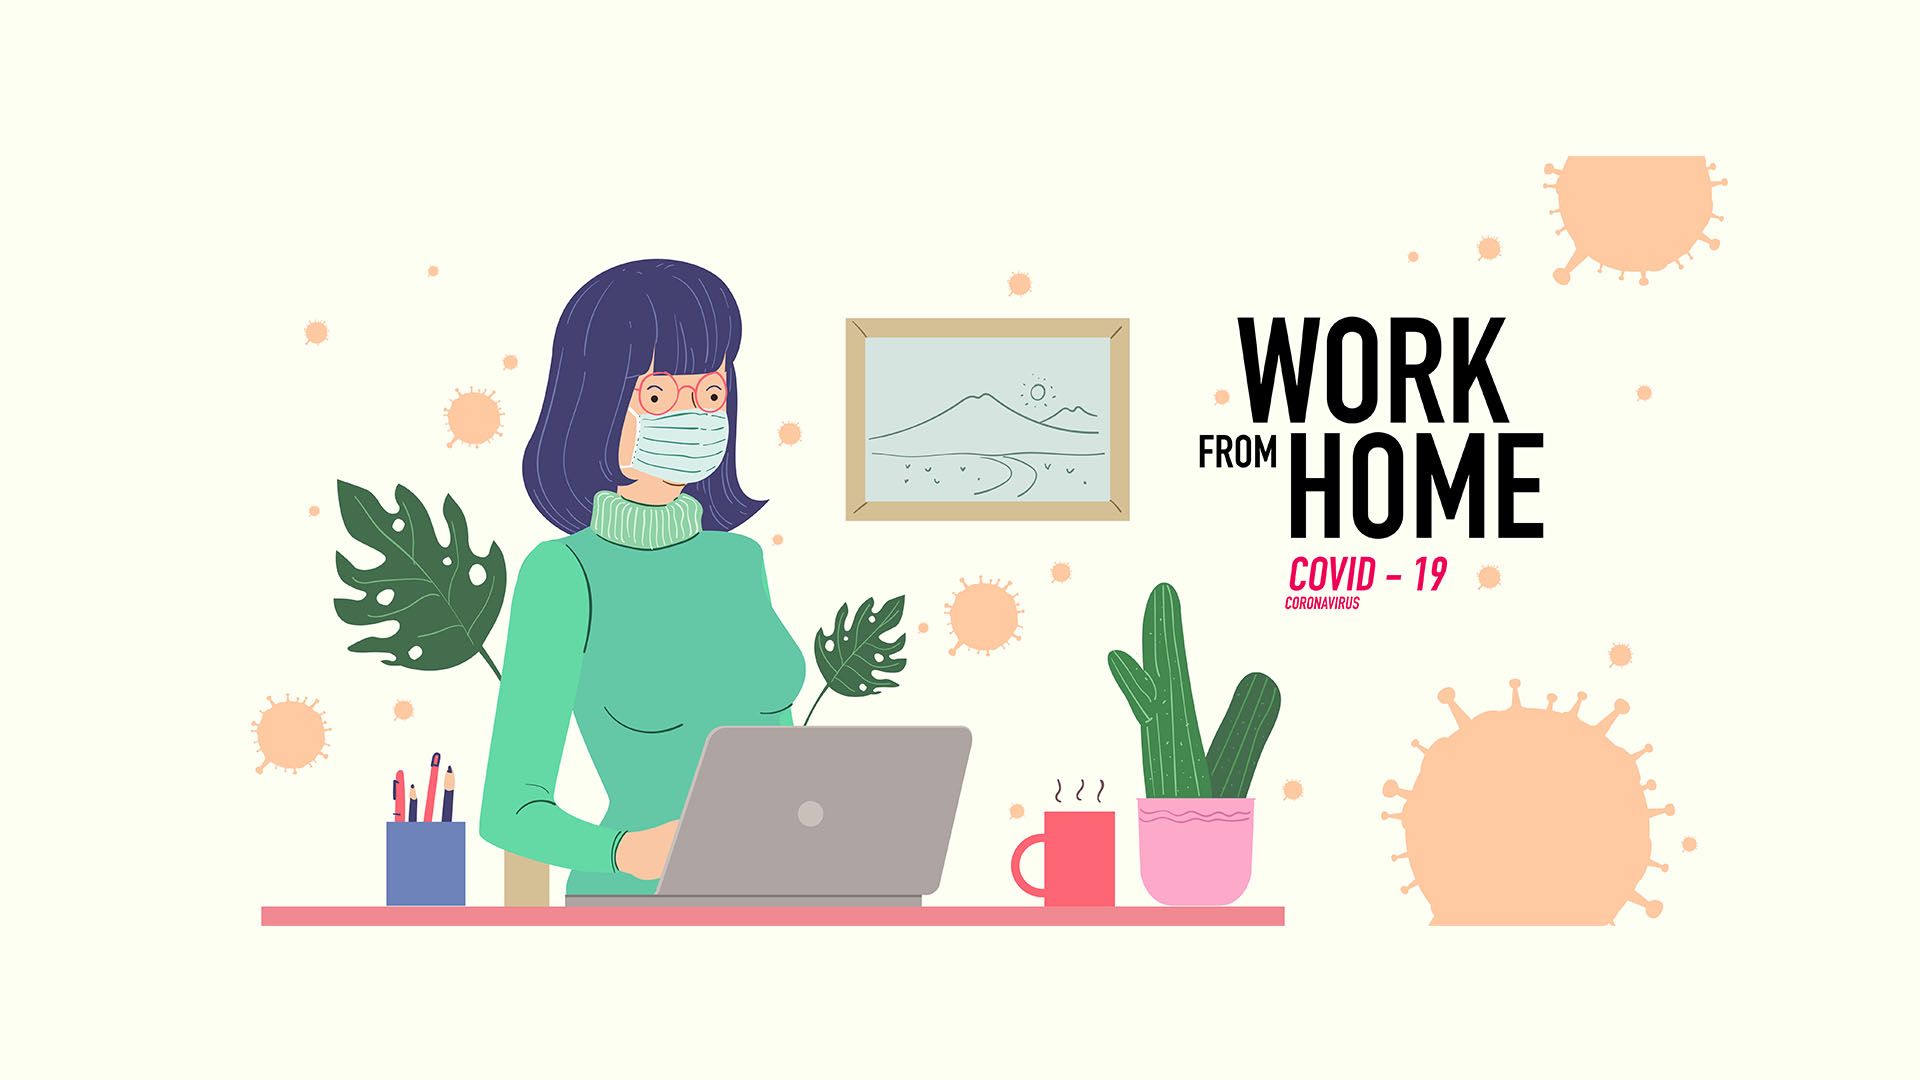 work from home during Covid19